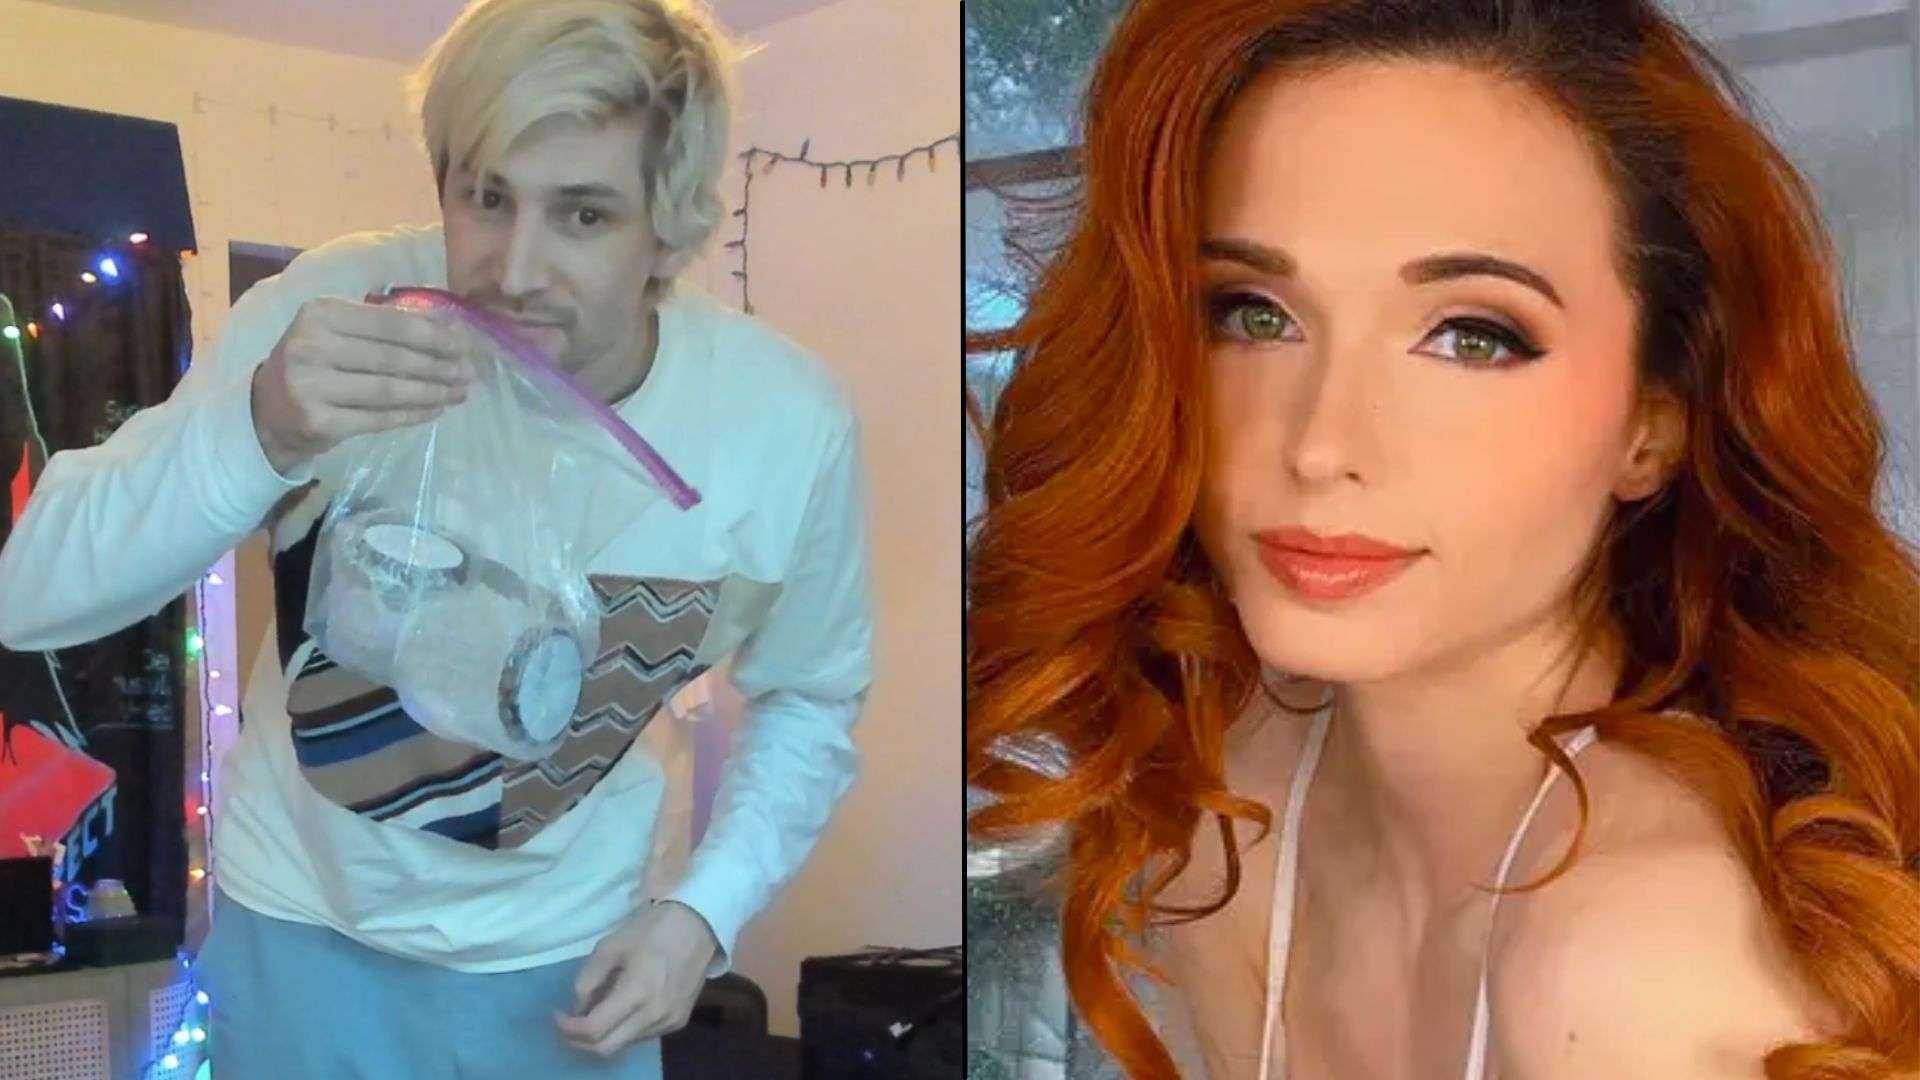 xQc sniffing bag of water next to Amouranth